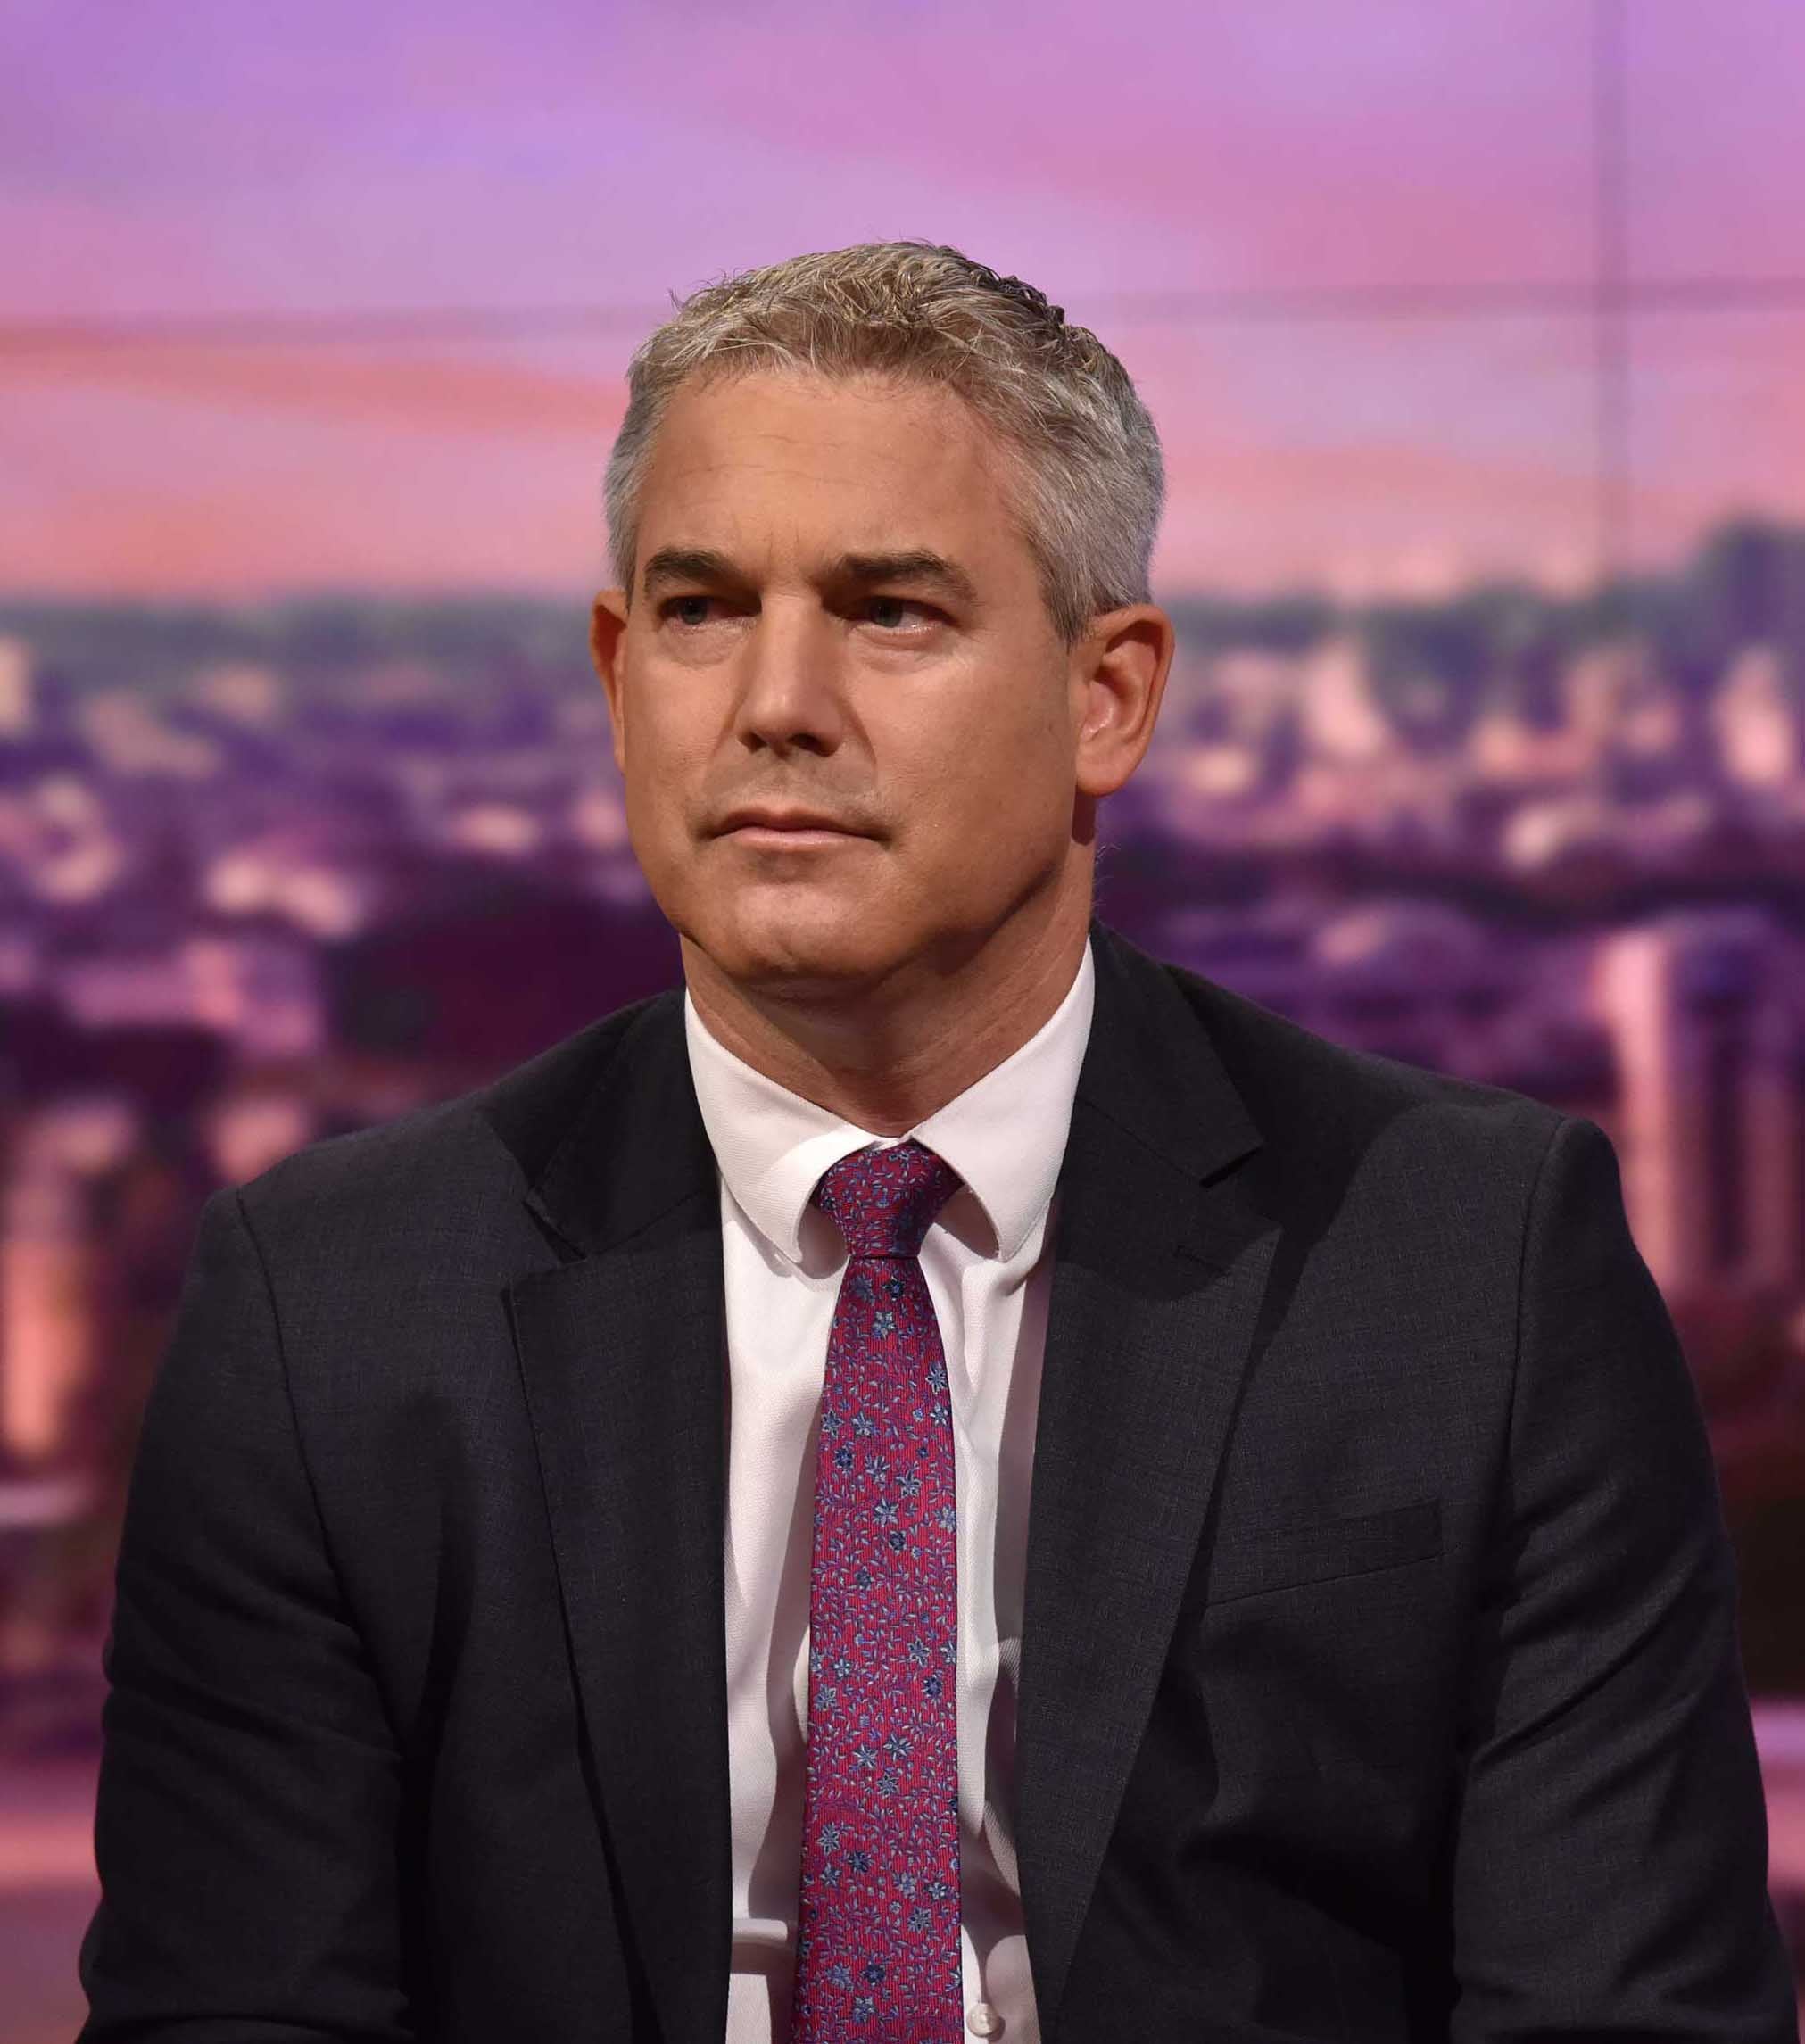 Steve Barclay previously served as Brexit Secretary (Jeff Overs/BBC)